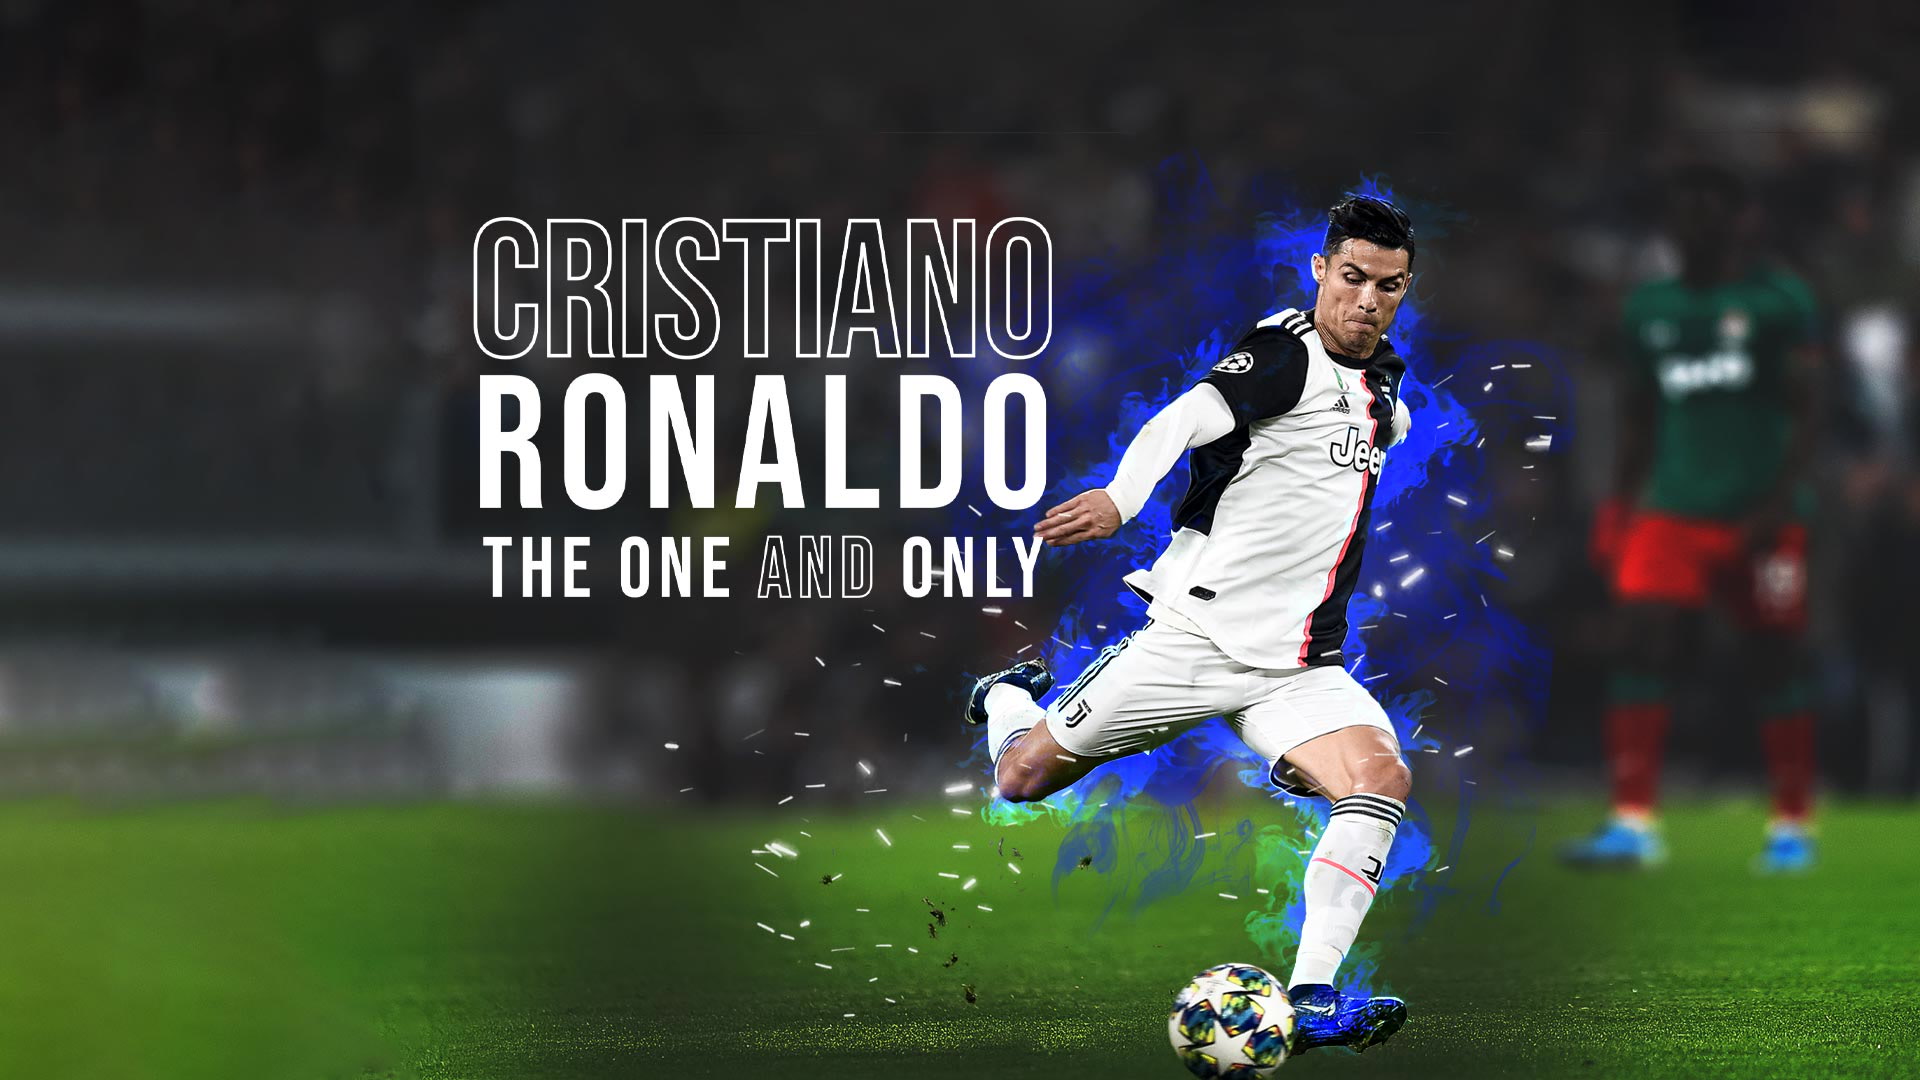 Cristiano Ronaldo - The One And Only